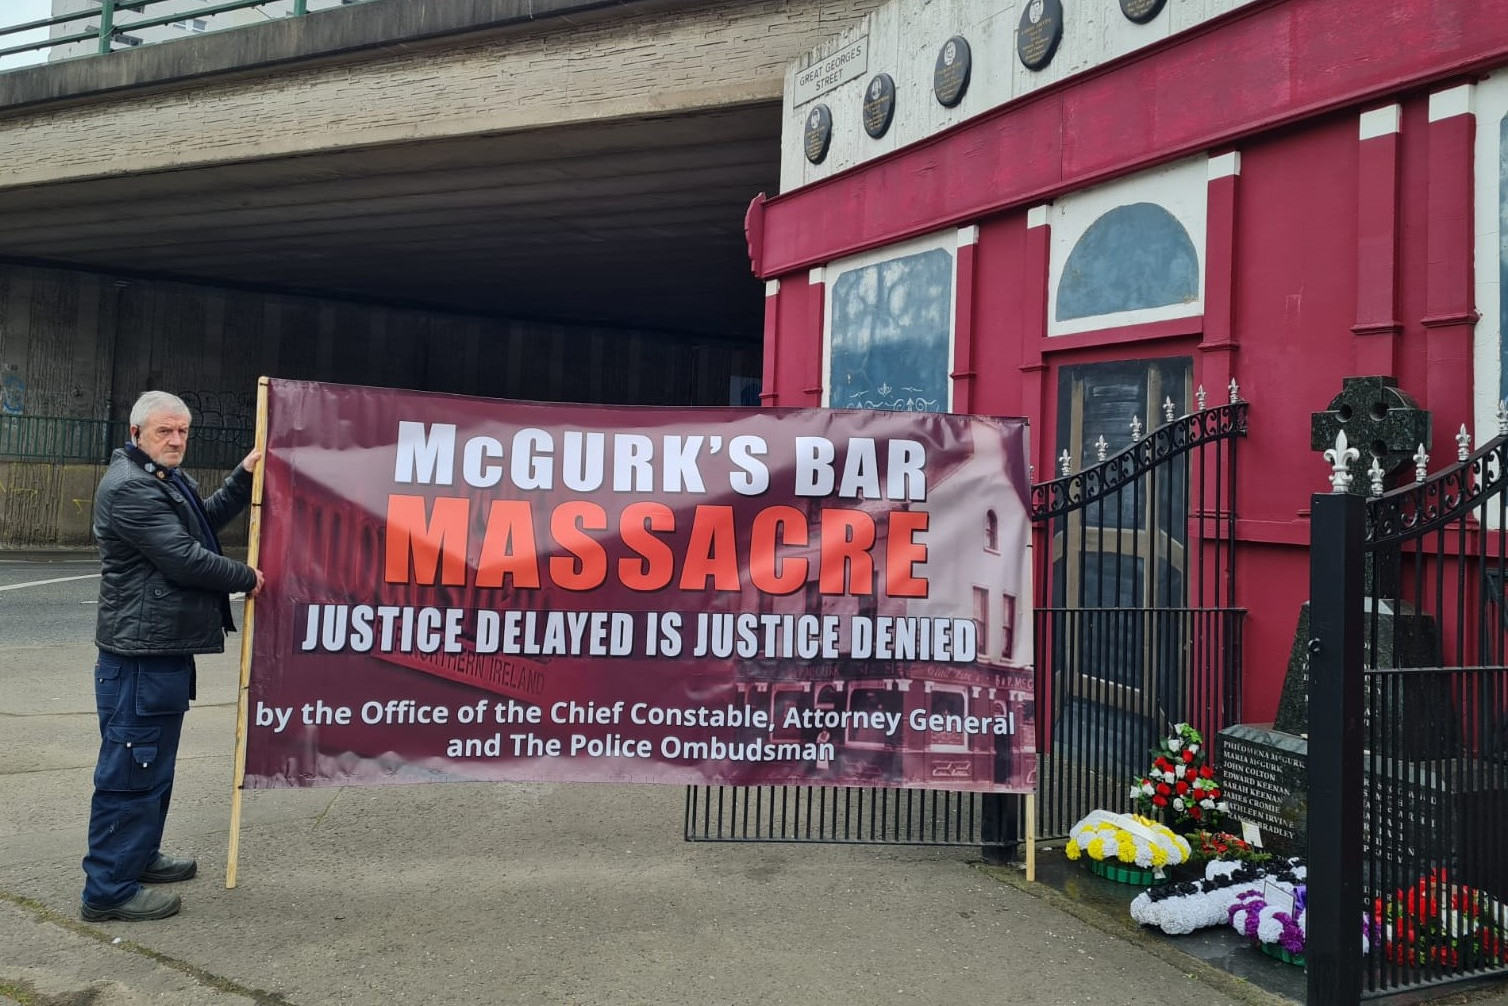 McGurk's Bar inquest ordered but set to be blocked